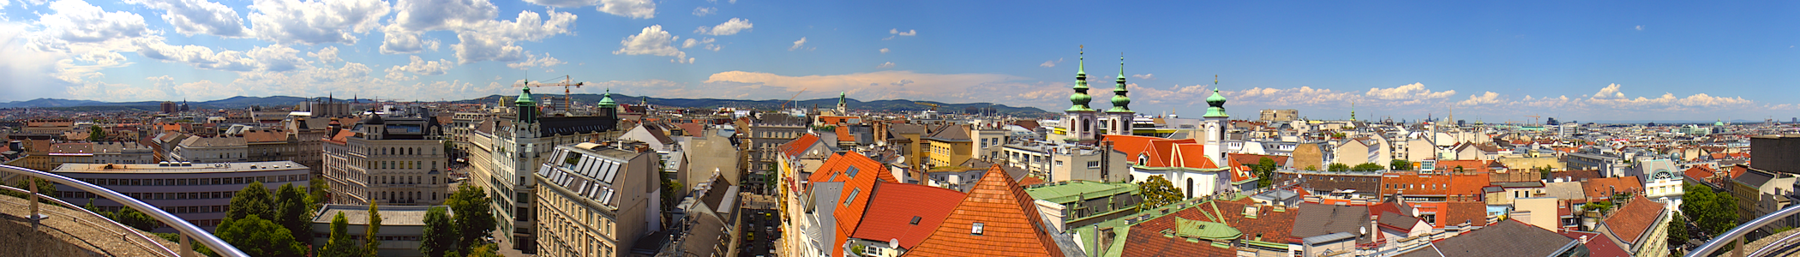 Looking over the rooftops of Vienna from the Haus des Meeres